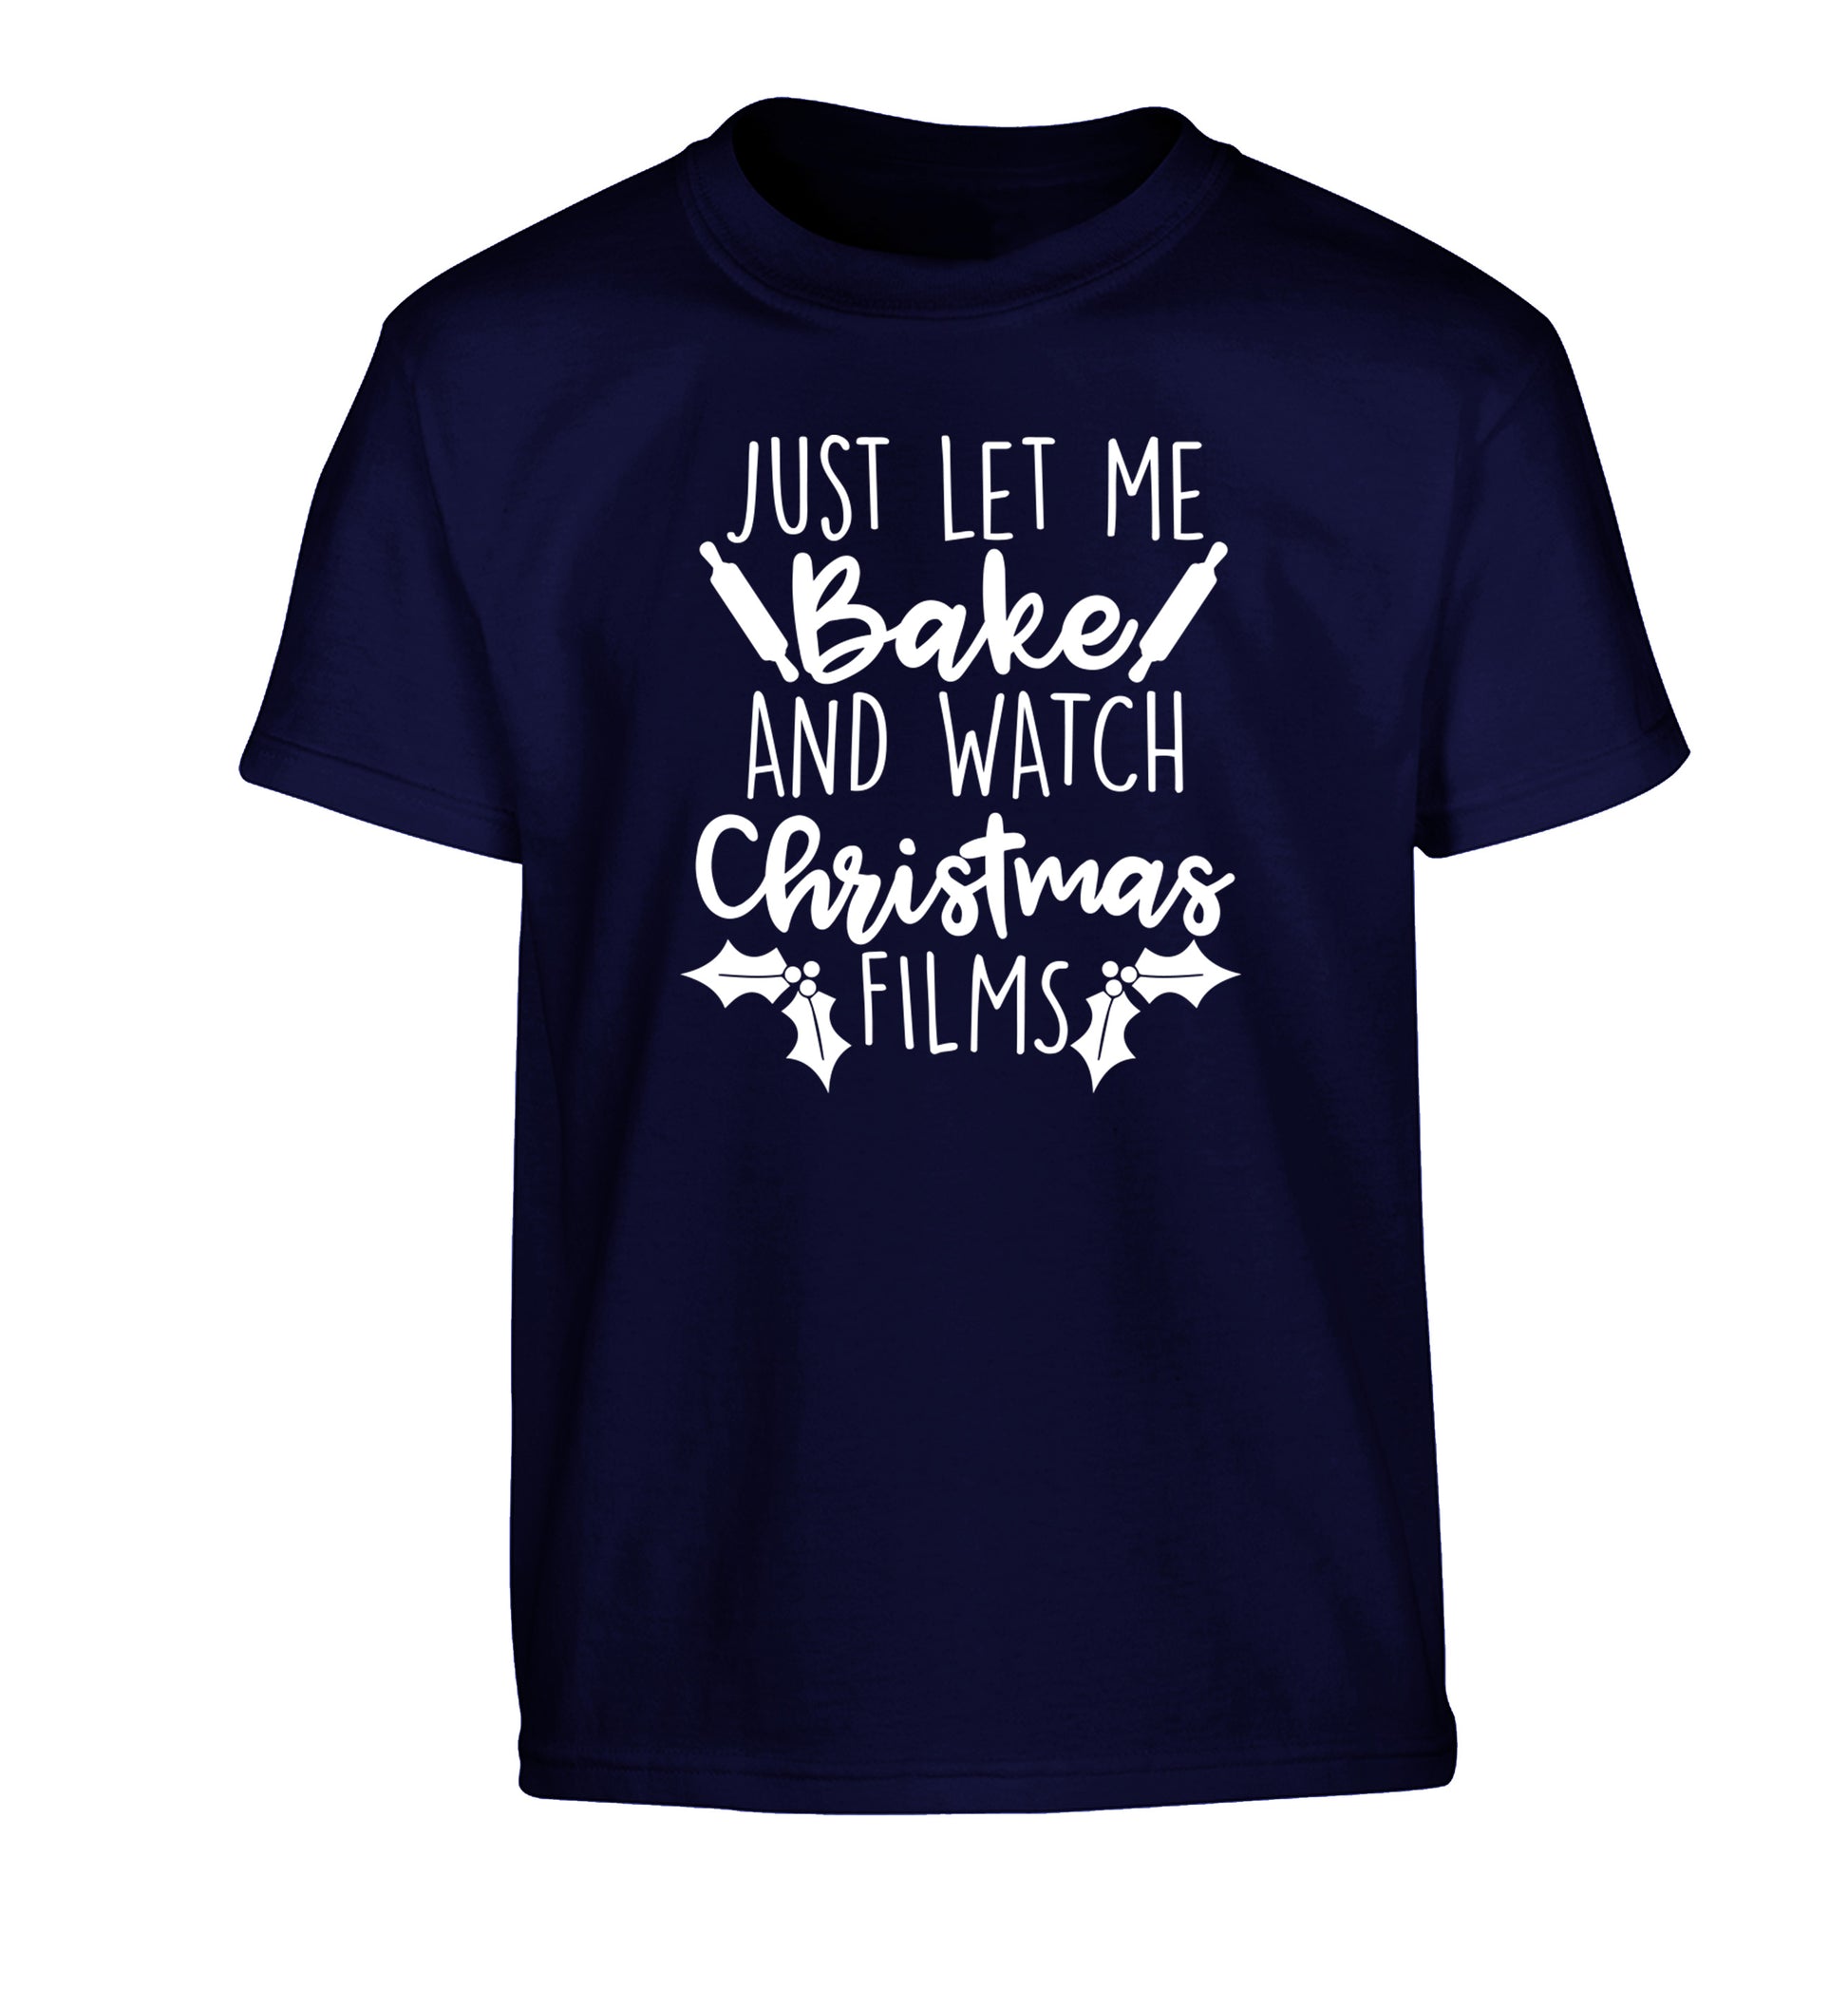 Just let me bake and watch Christmas films Children's navy Tshirt 12-14 Years